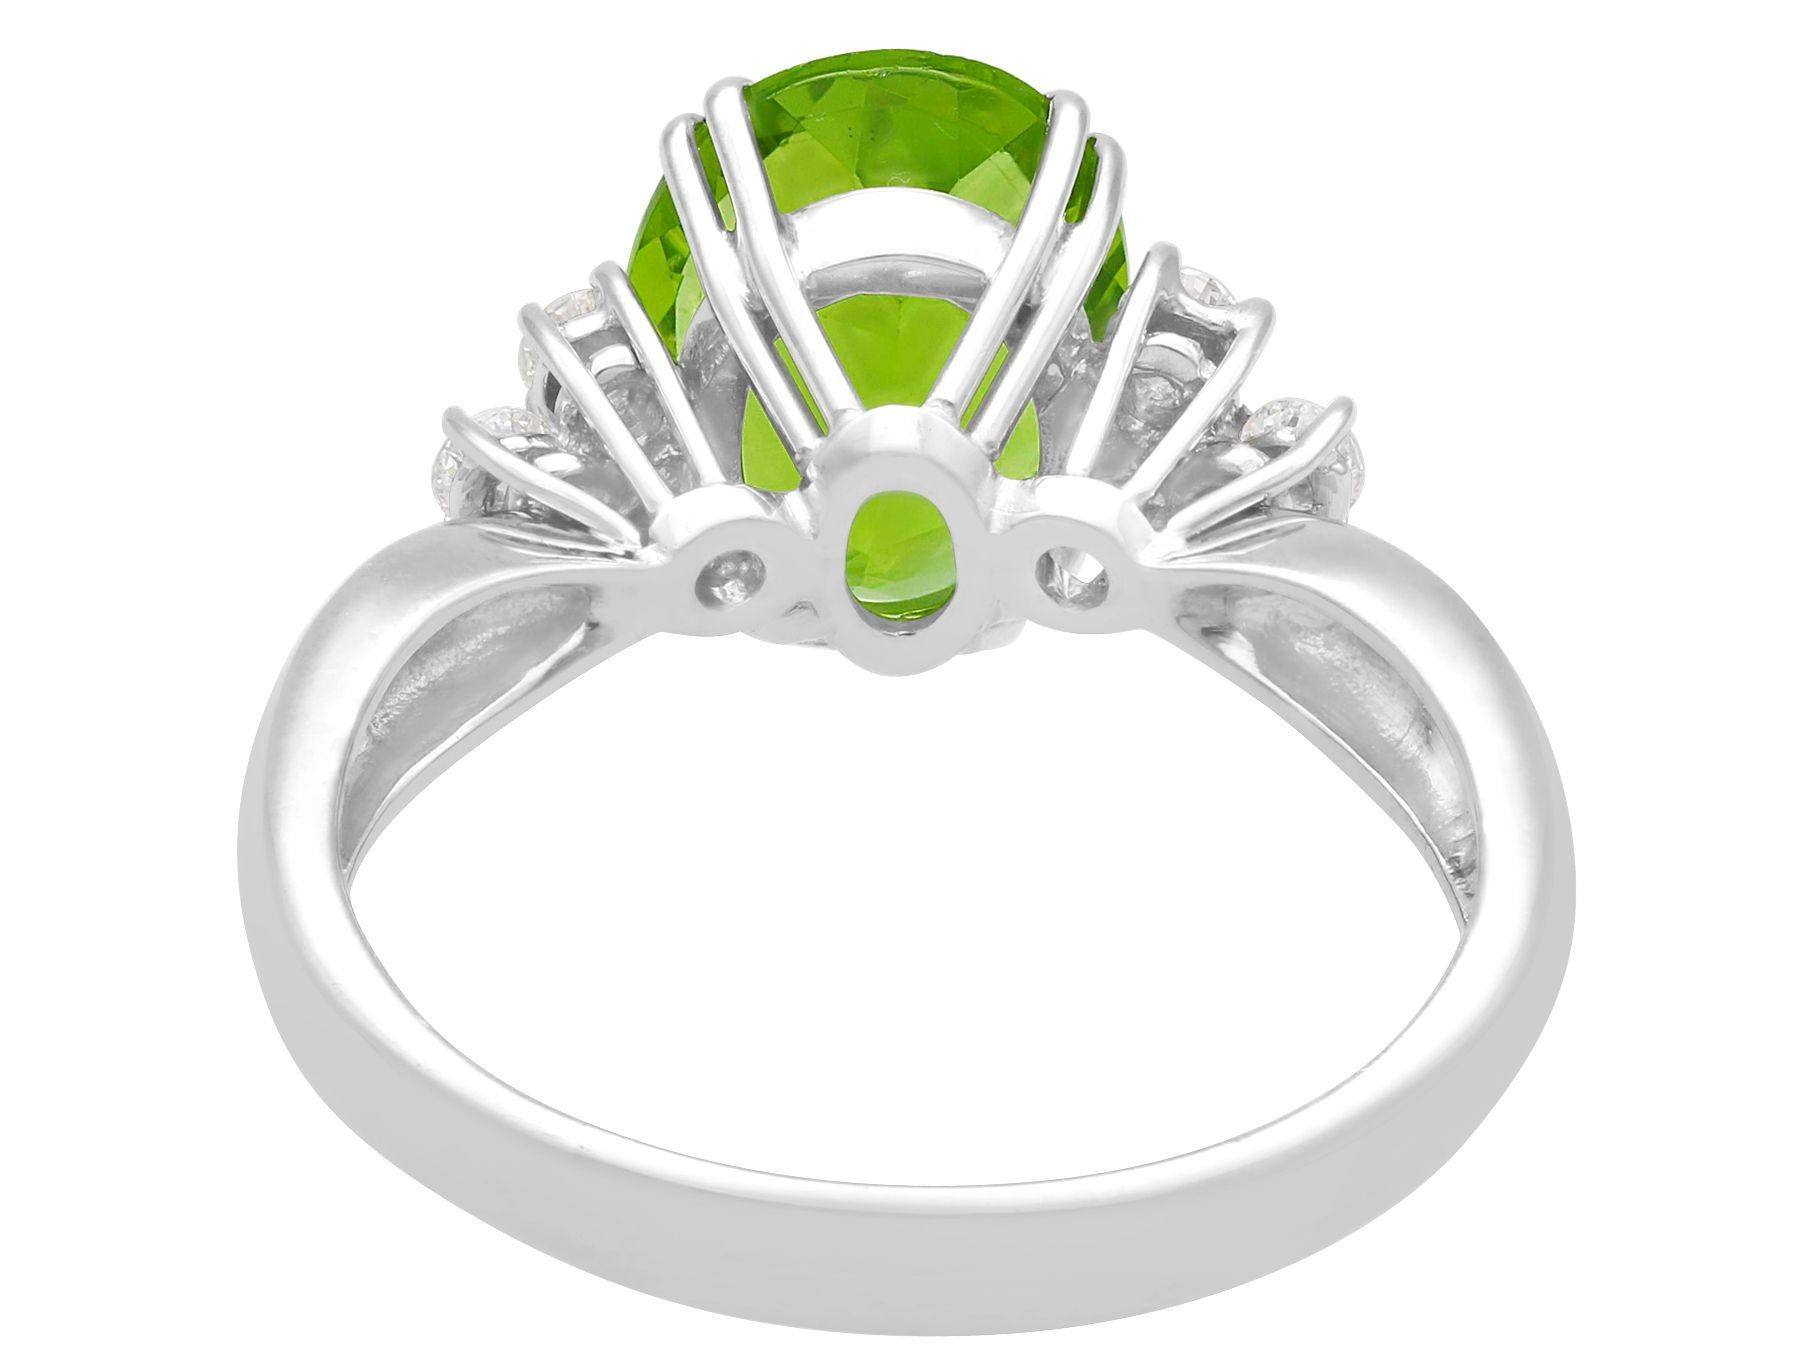 Vintage 6.84ct Peridot Diamond White Gold Dress Ring In Excellent Condition For Sale In Jesmond, Newcastle Upon Tyne